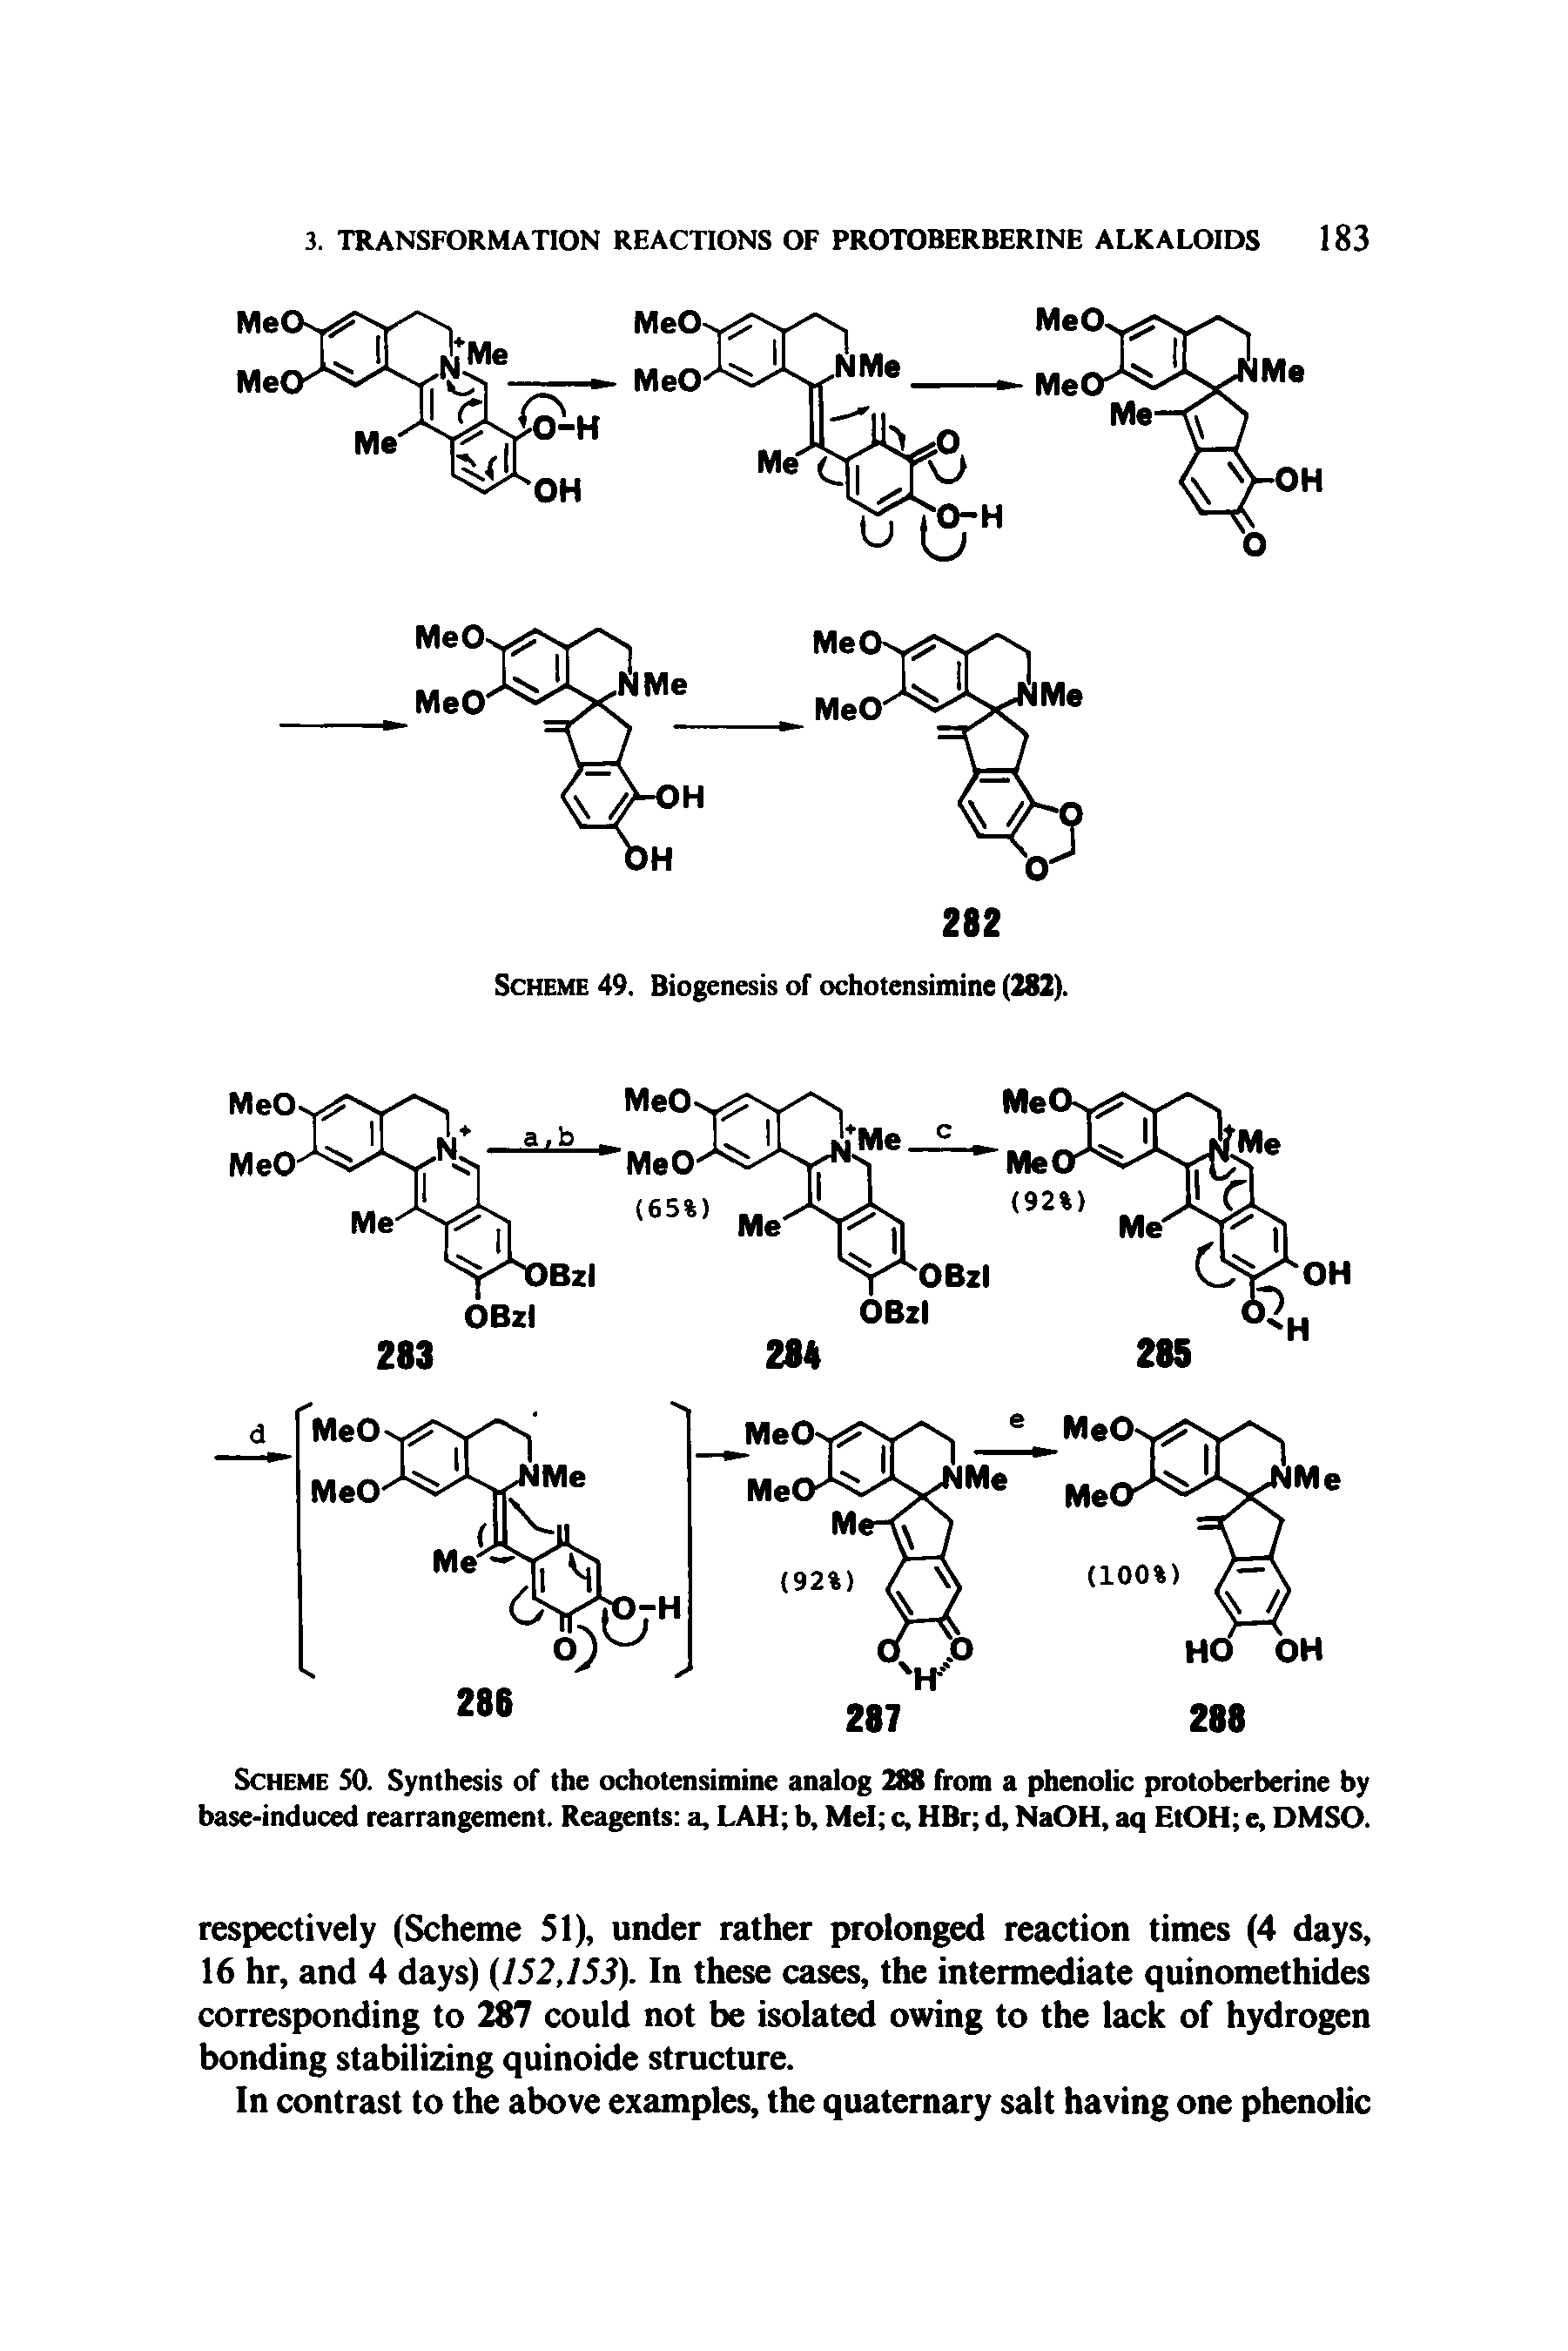 Scheme SO. Synthesis of the ochotensimine analog 288 from a phenolic protoberberine by base-induced rearrangement. Reagents a, LAH b, Mel c, HBr d, NaOH, aq EtOH e, DMSO.